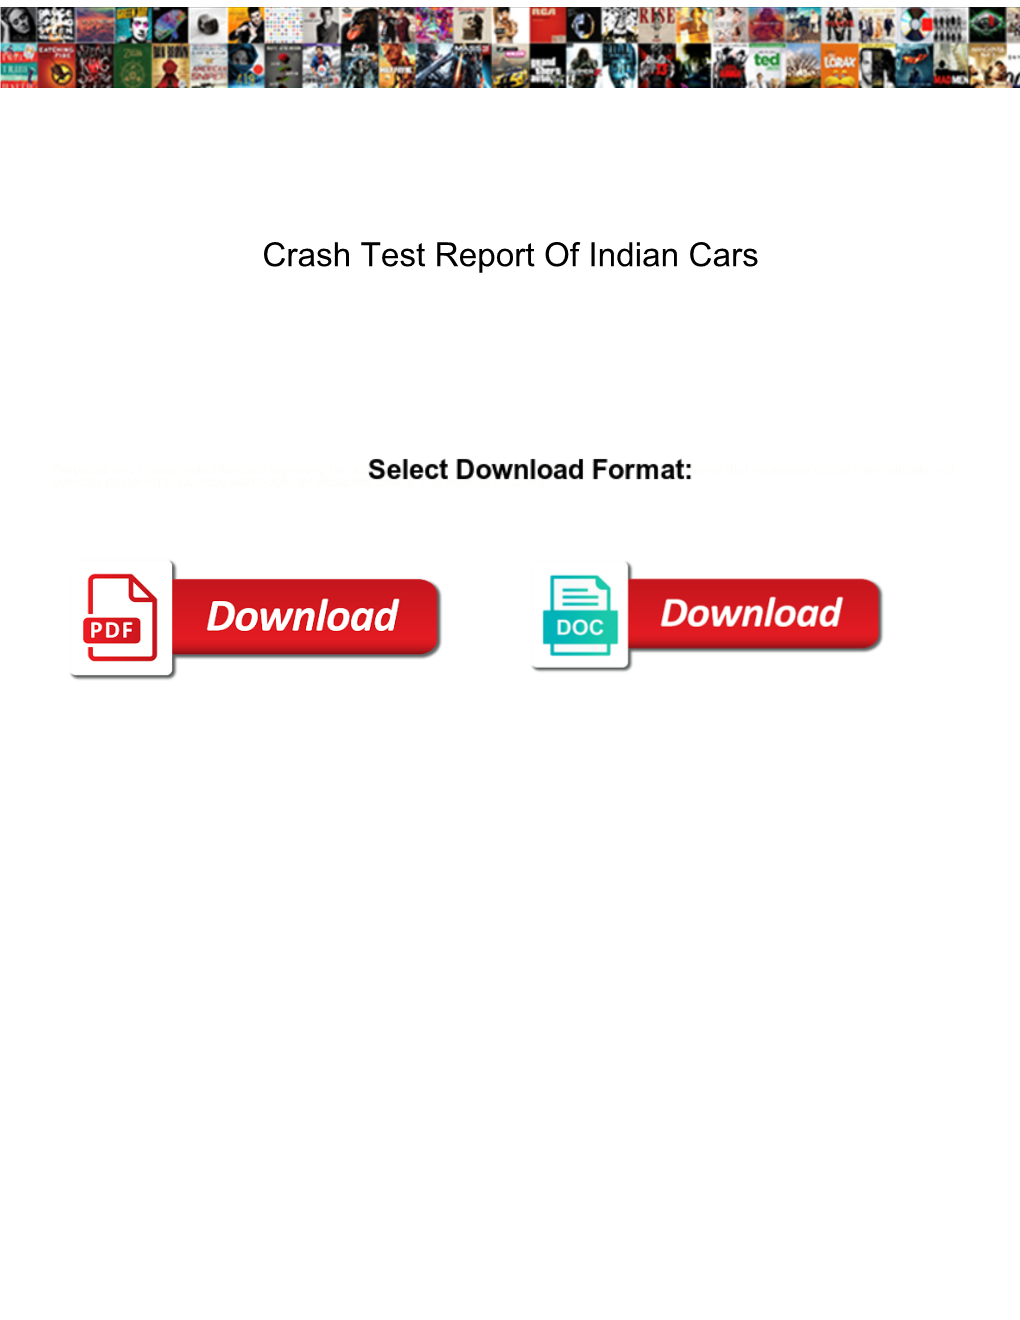 Crash Test Report of Indian Cars